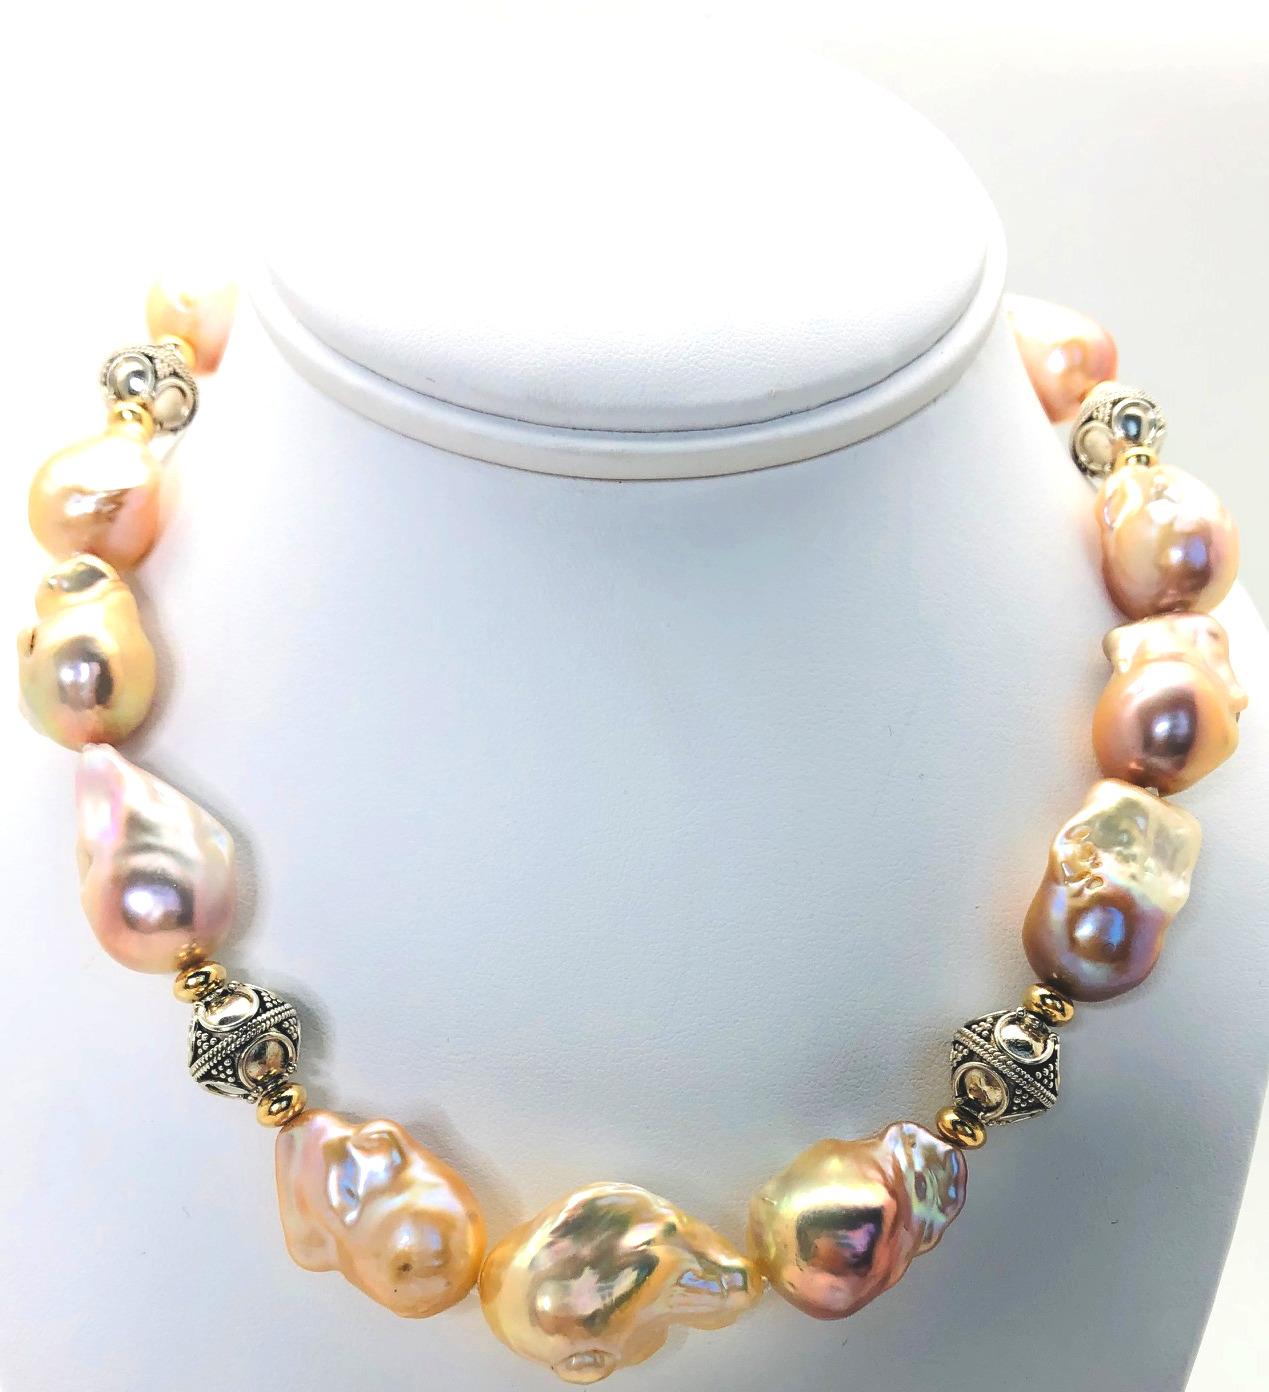 Bead Golden Peach Baroque Pearl Choker Necklace w/ Silver & 18k Yellow Gold Accents